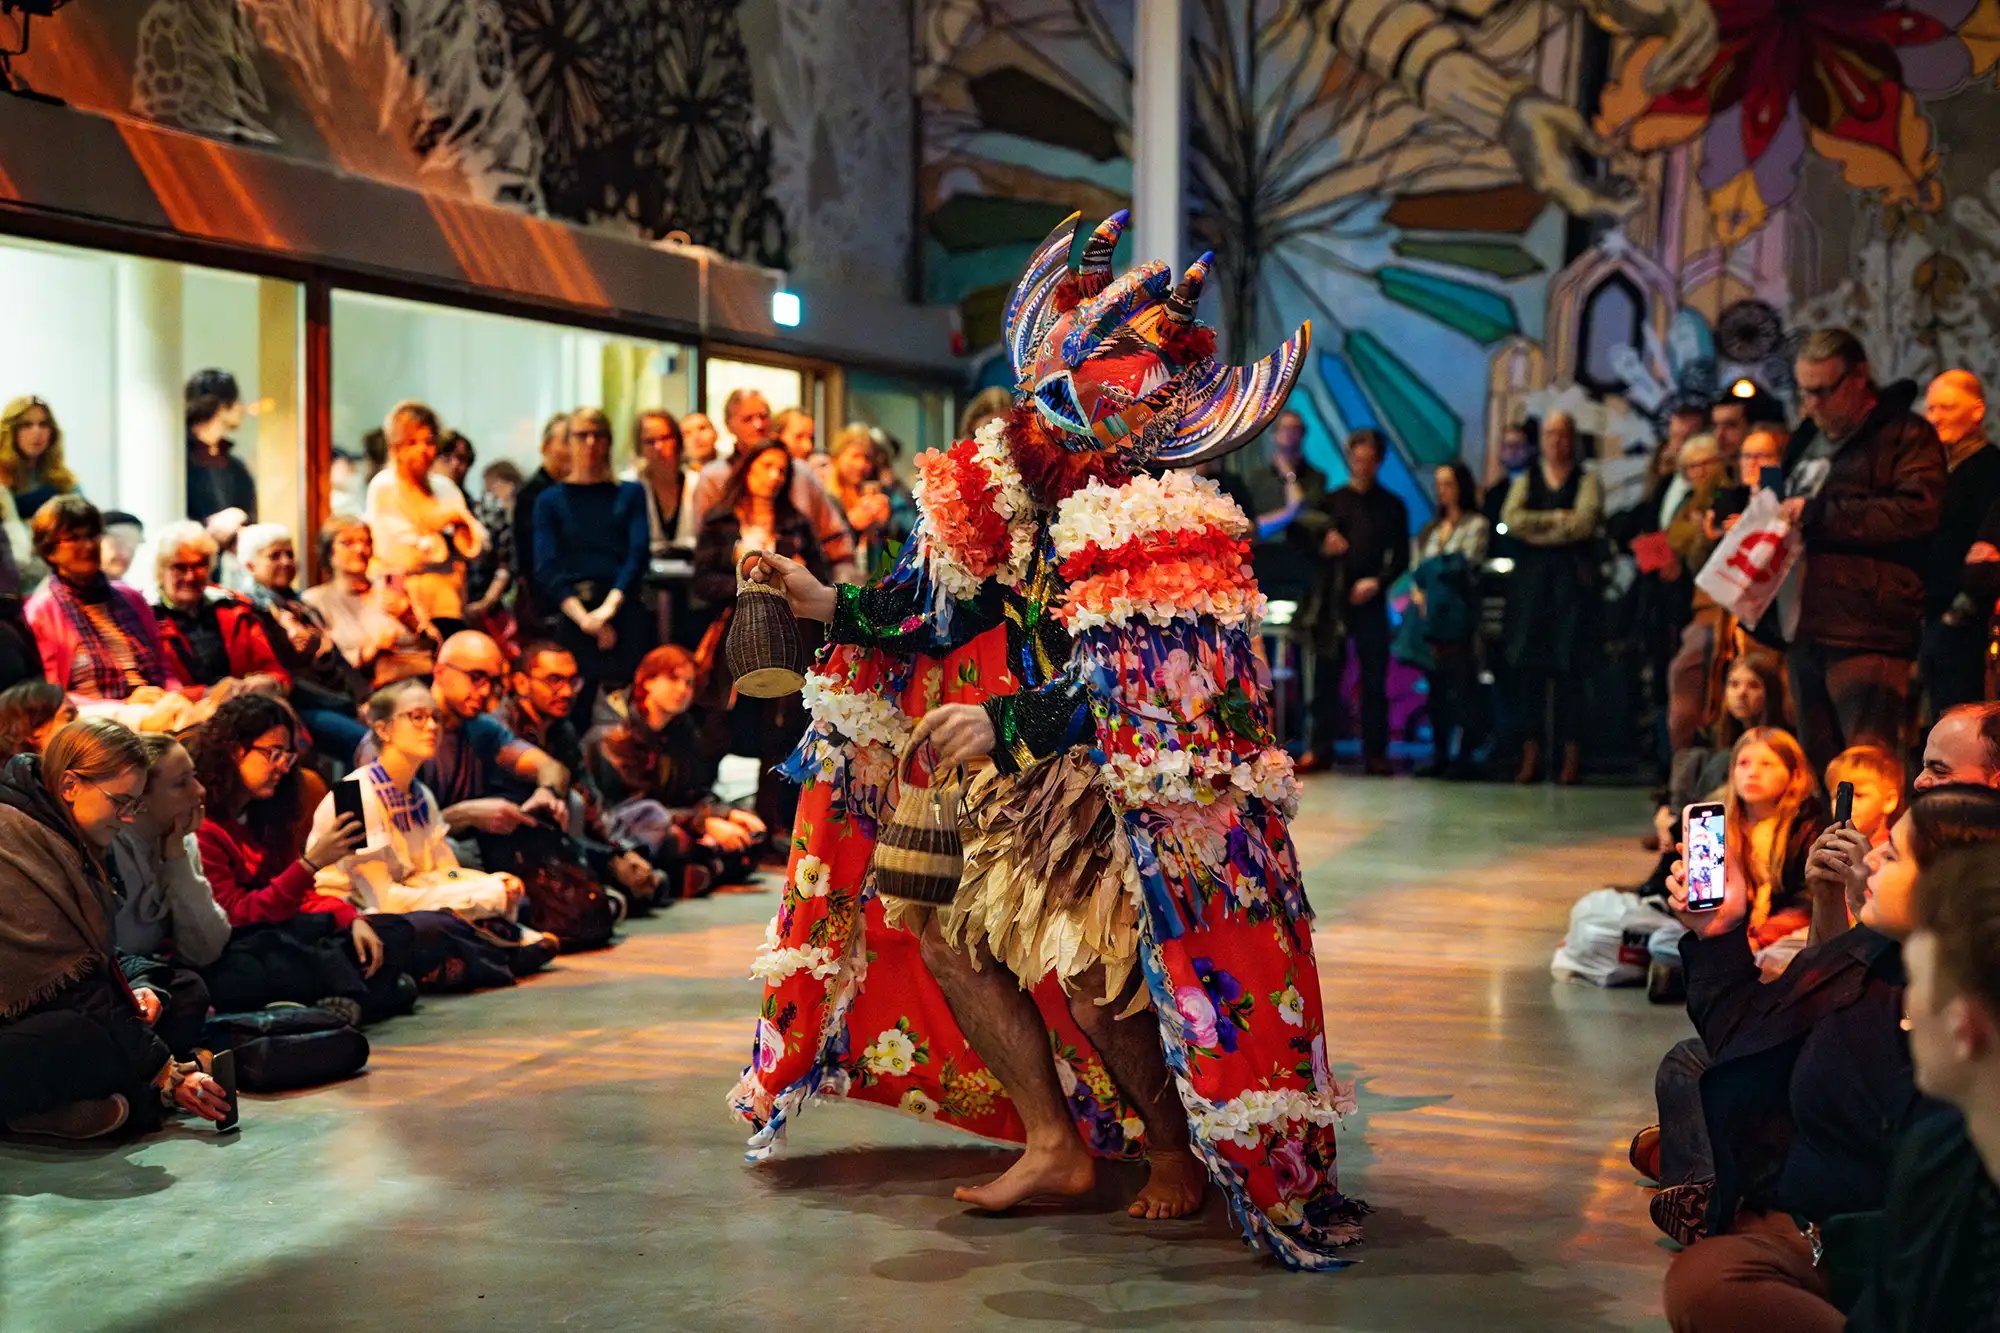 jumu monster, promising emerging artist, dance performance in indigenous costumes and tribe